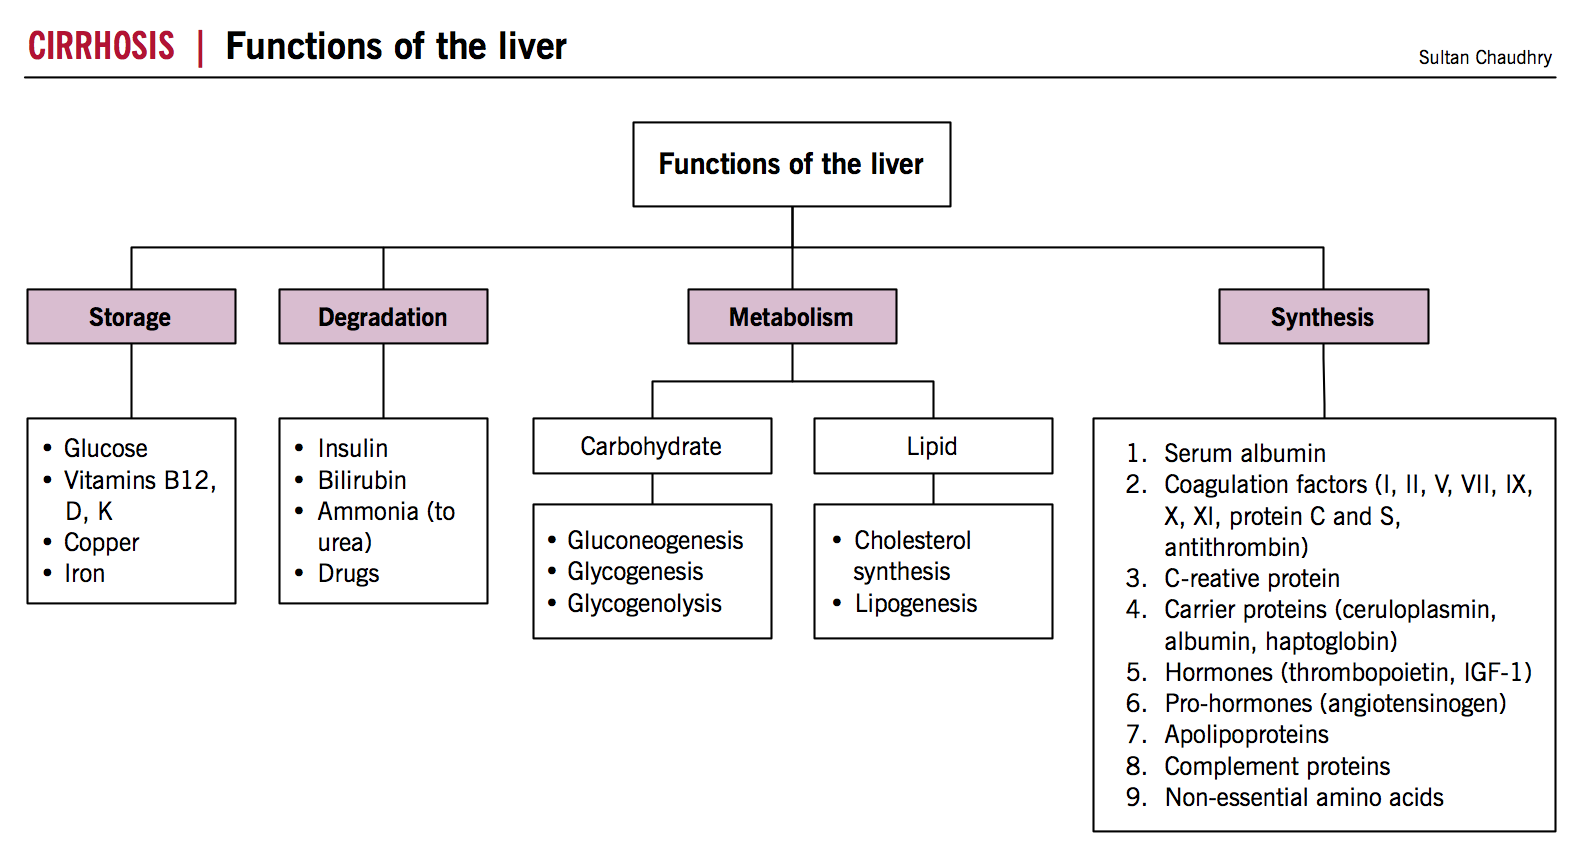 Normal liver functions